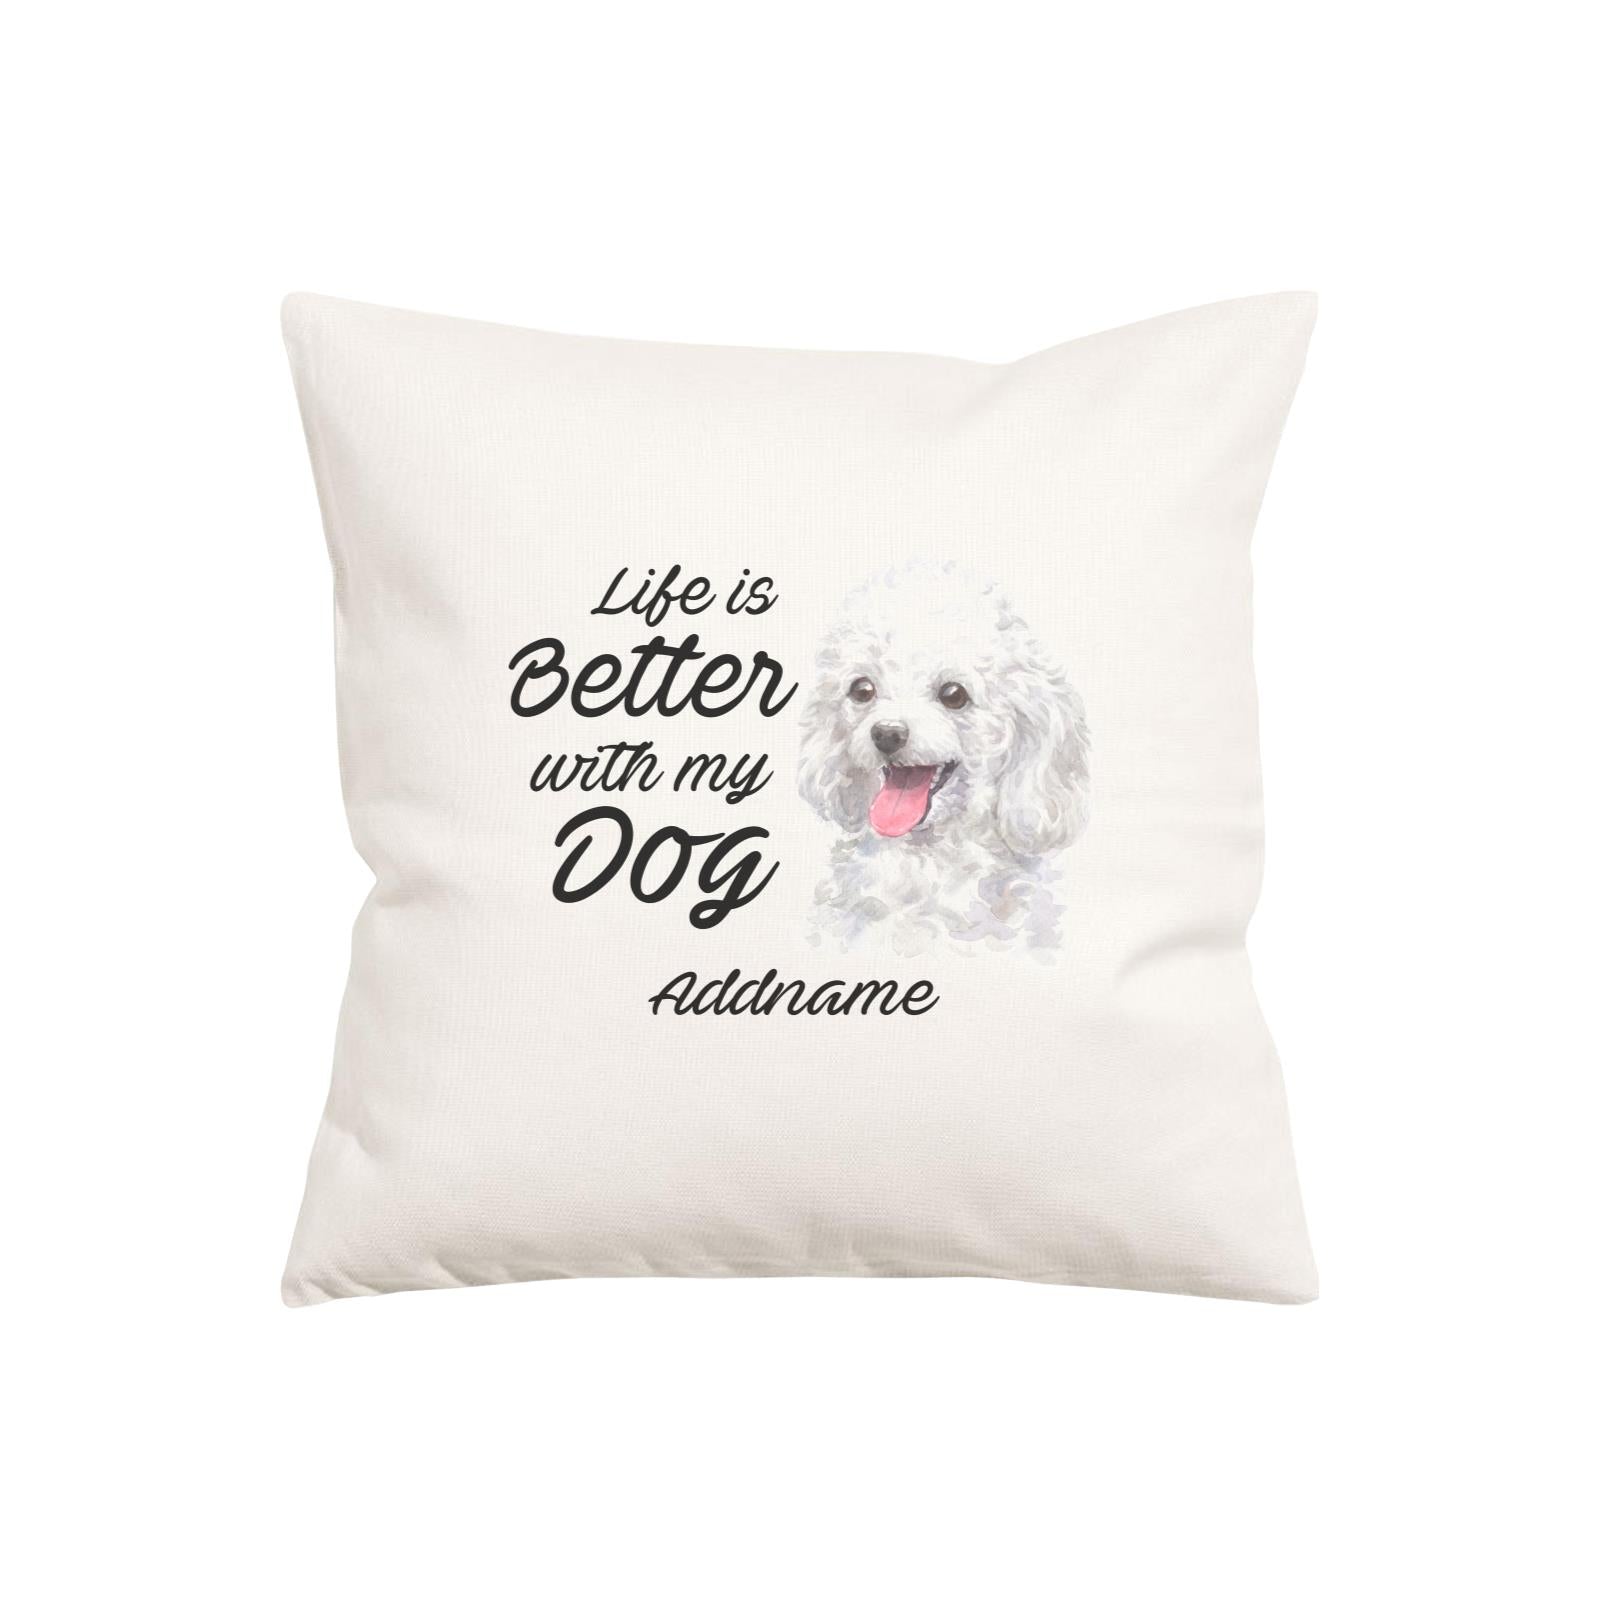 Watercolor Life is Better With My Dog Poodle White Addname Pillow Cushion